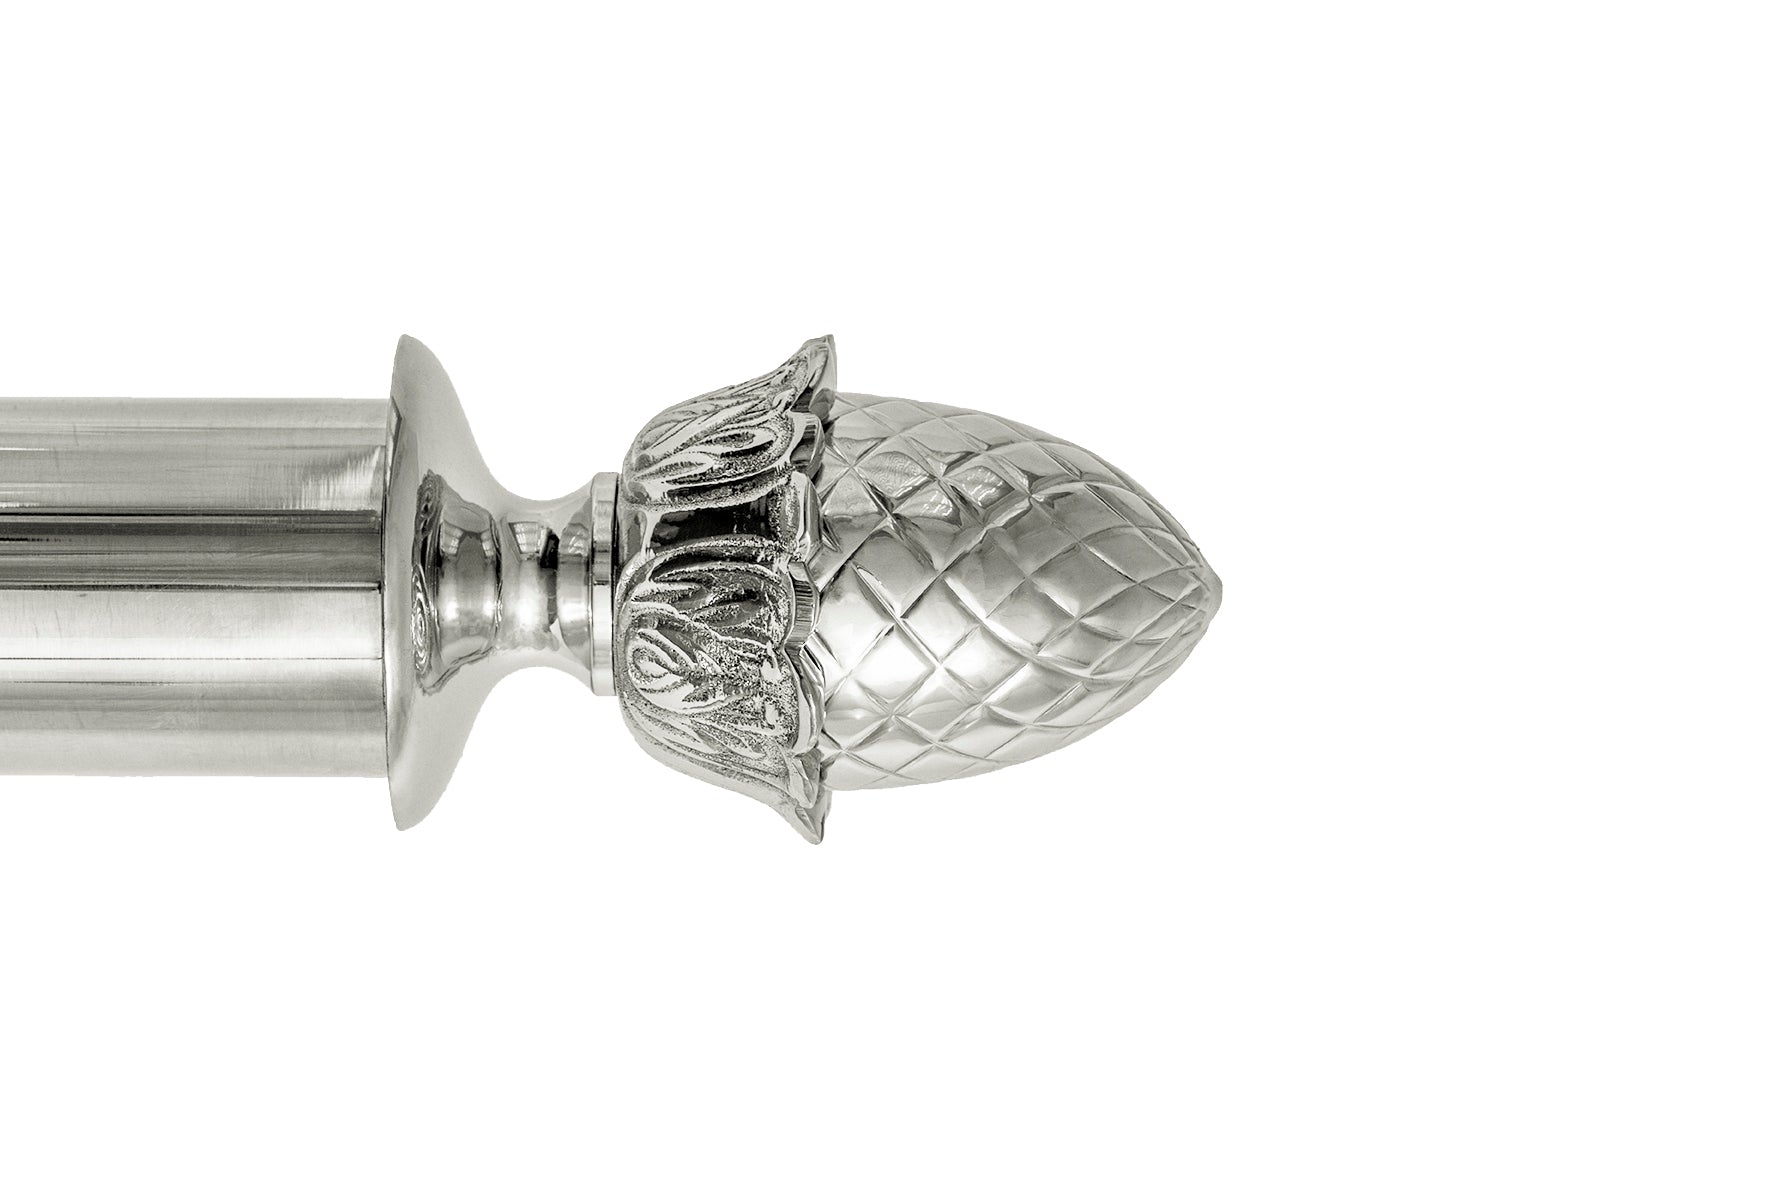 Tillys Classic Pineapple Finial Curtain Pole Set in Polished Nickel